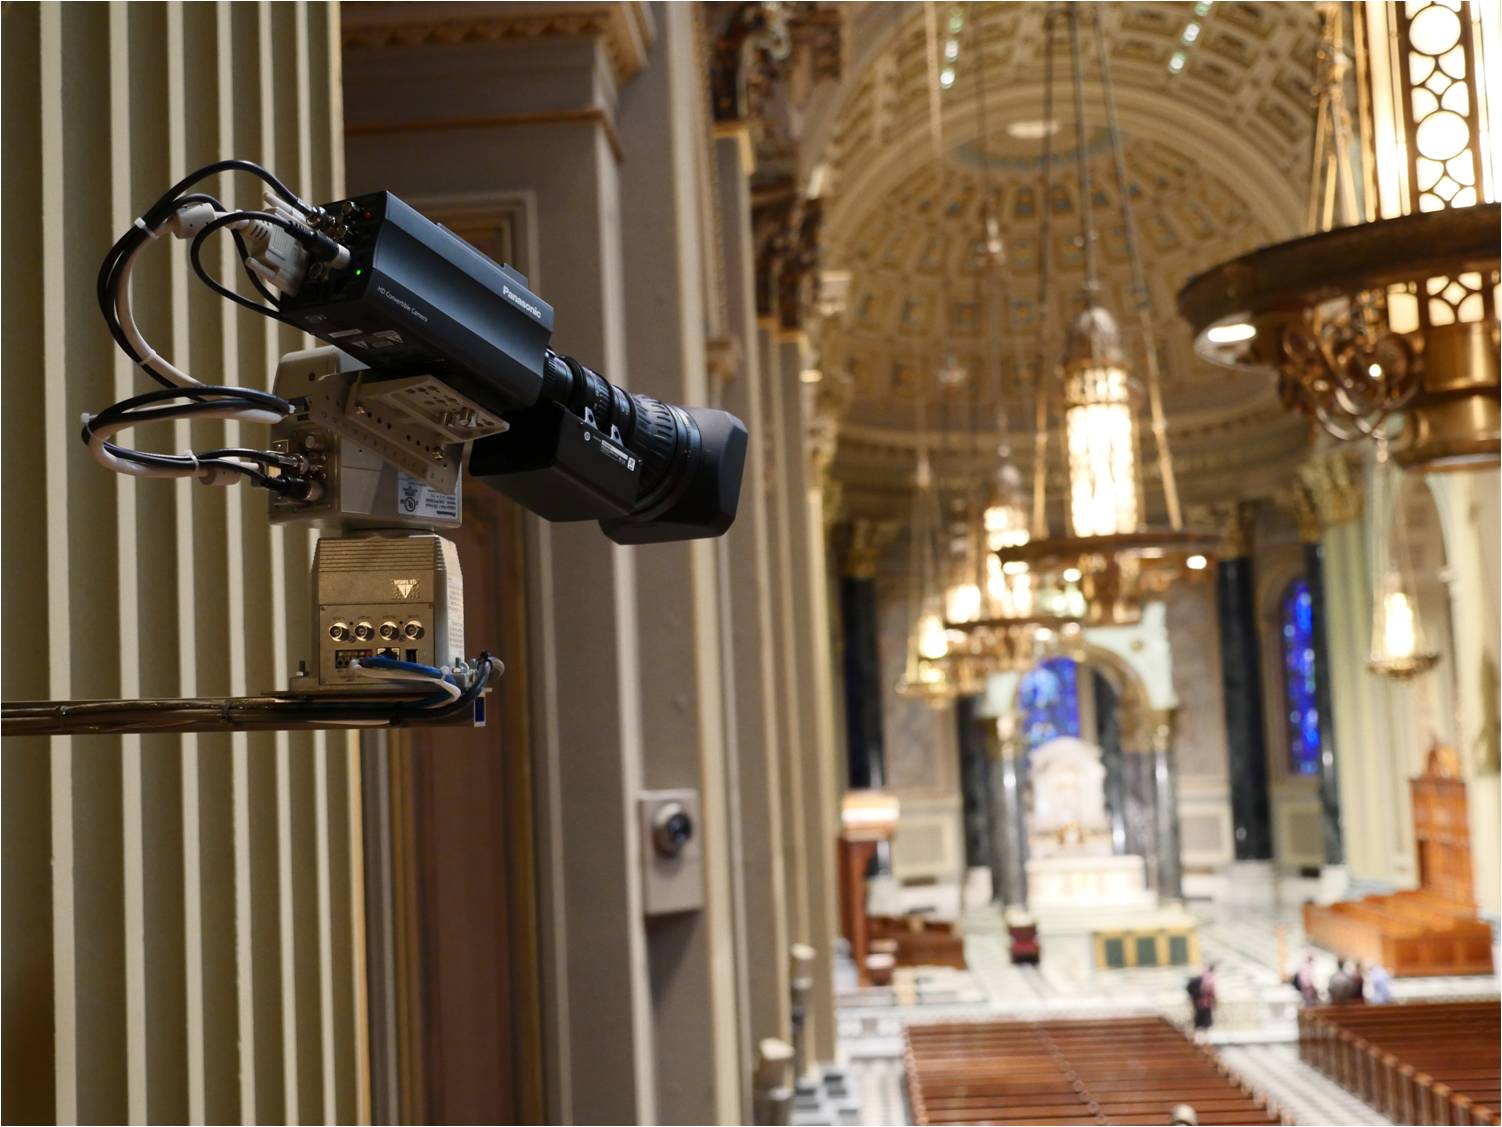 Cathedral Basilica Updated with Latest Technology for Pope’s Visit